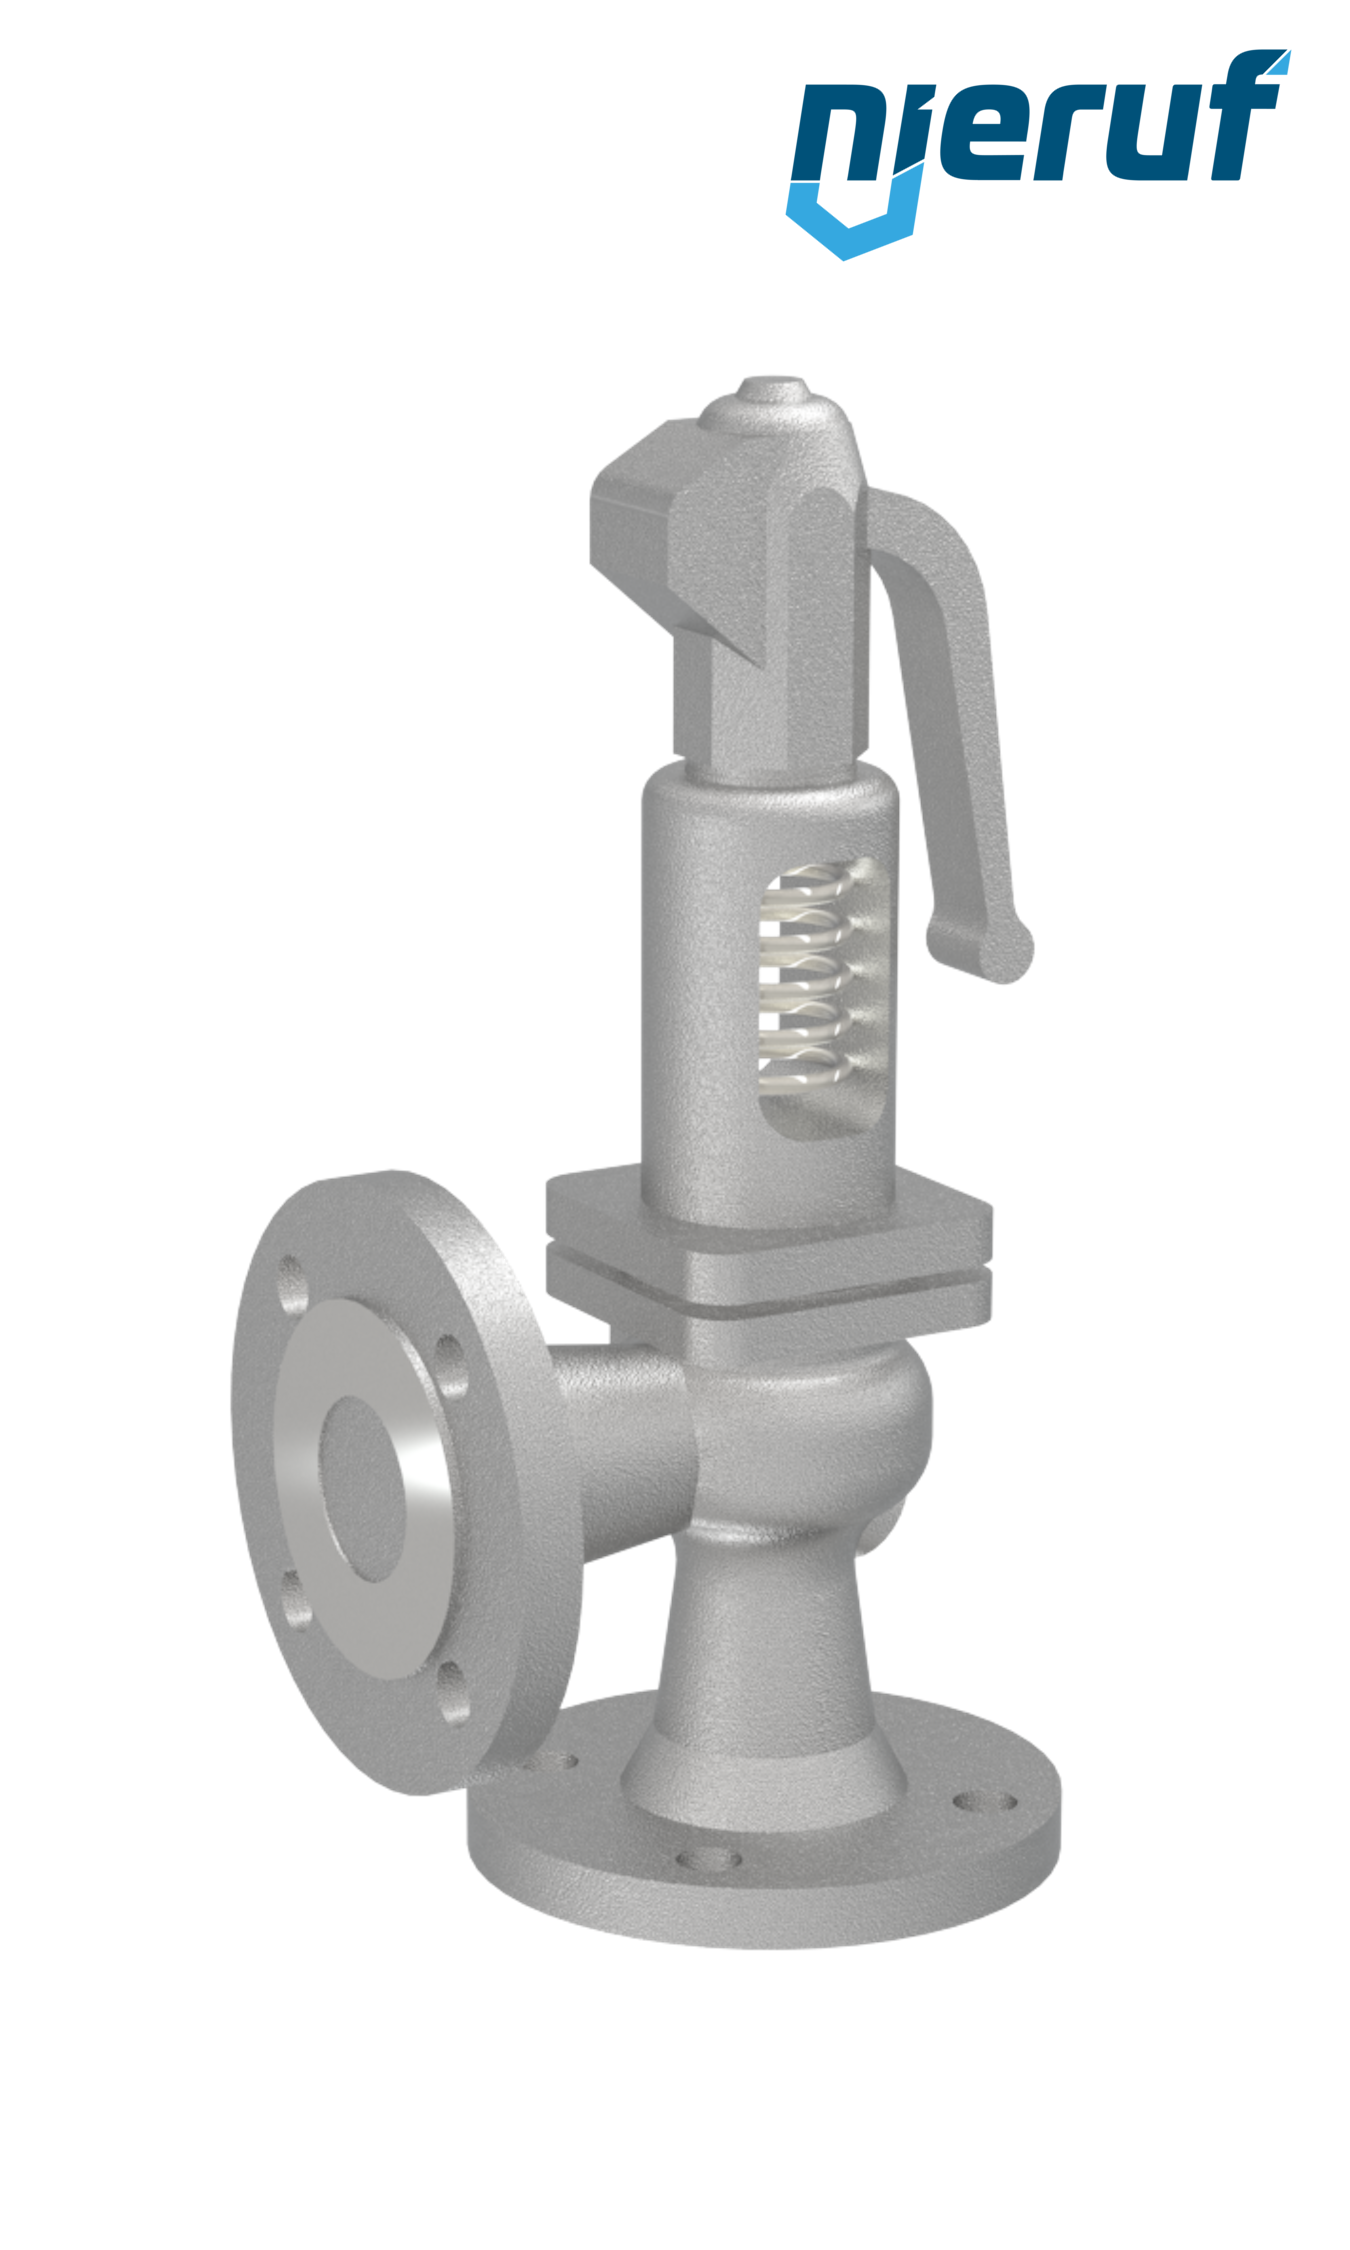 flange-safety valve DN80/DN80 SF0202, cast steel EPDM, with lever